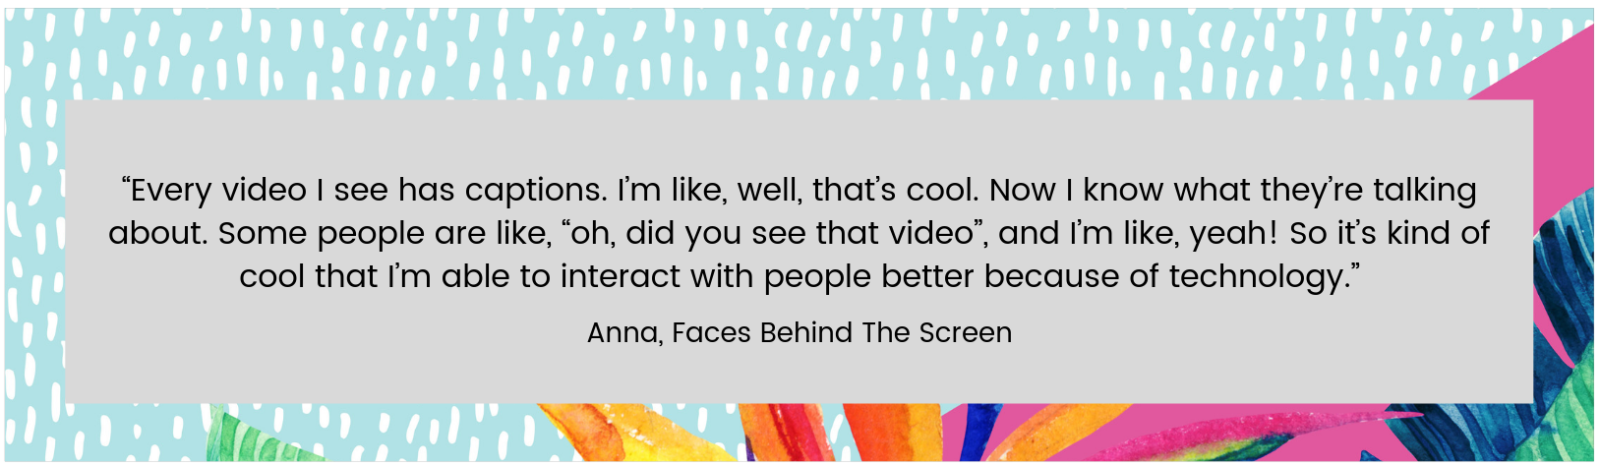 “Every video I see has captions. I’m like, well, that’s cool. Now I know what they’re talking about. Some people are like, “oh, did you see that video”, and I’m like, yeah! So it’s kind of cool that I’m able to interact with people better because of technology.” Anna, Faces Behind The Screen